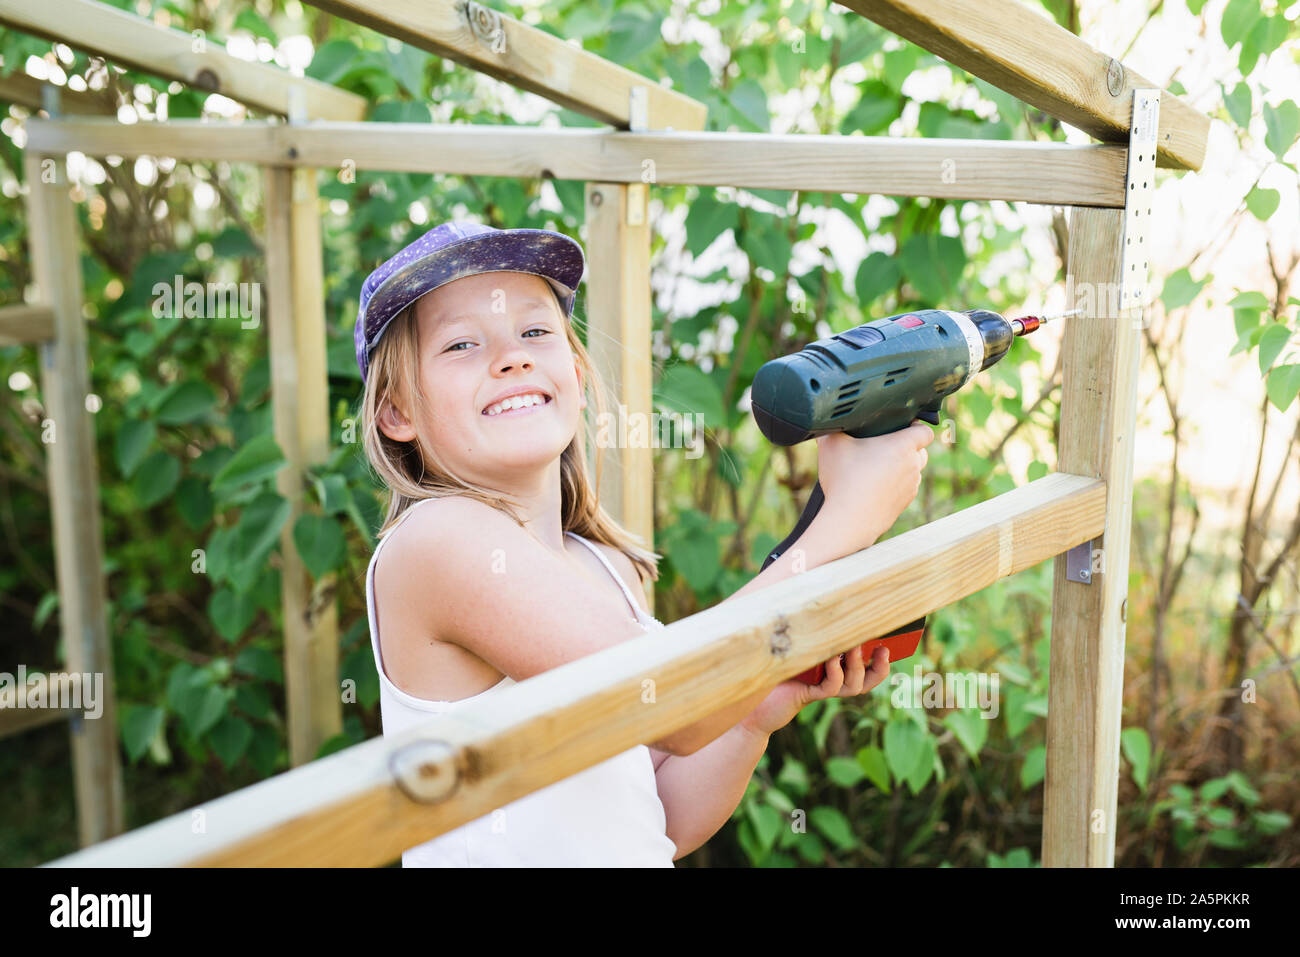 Girl with electric drill Stock Photo